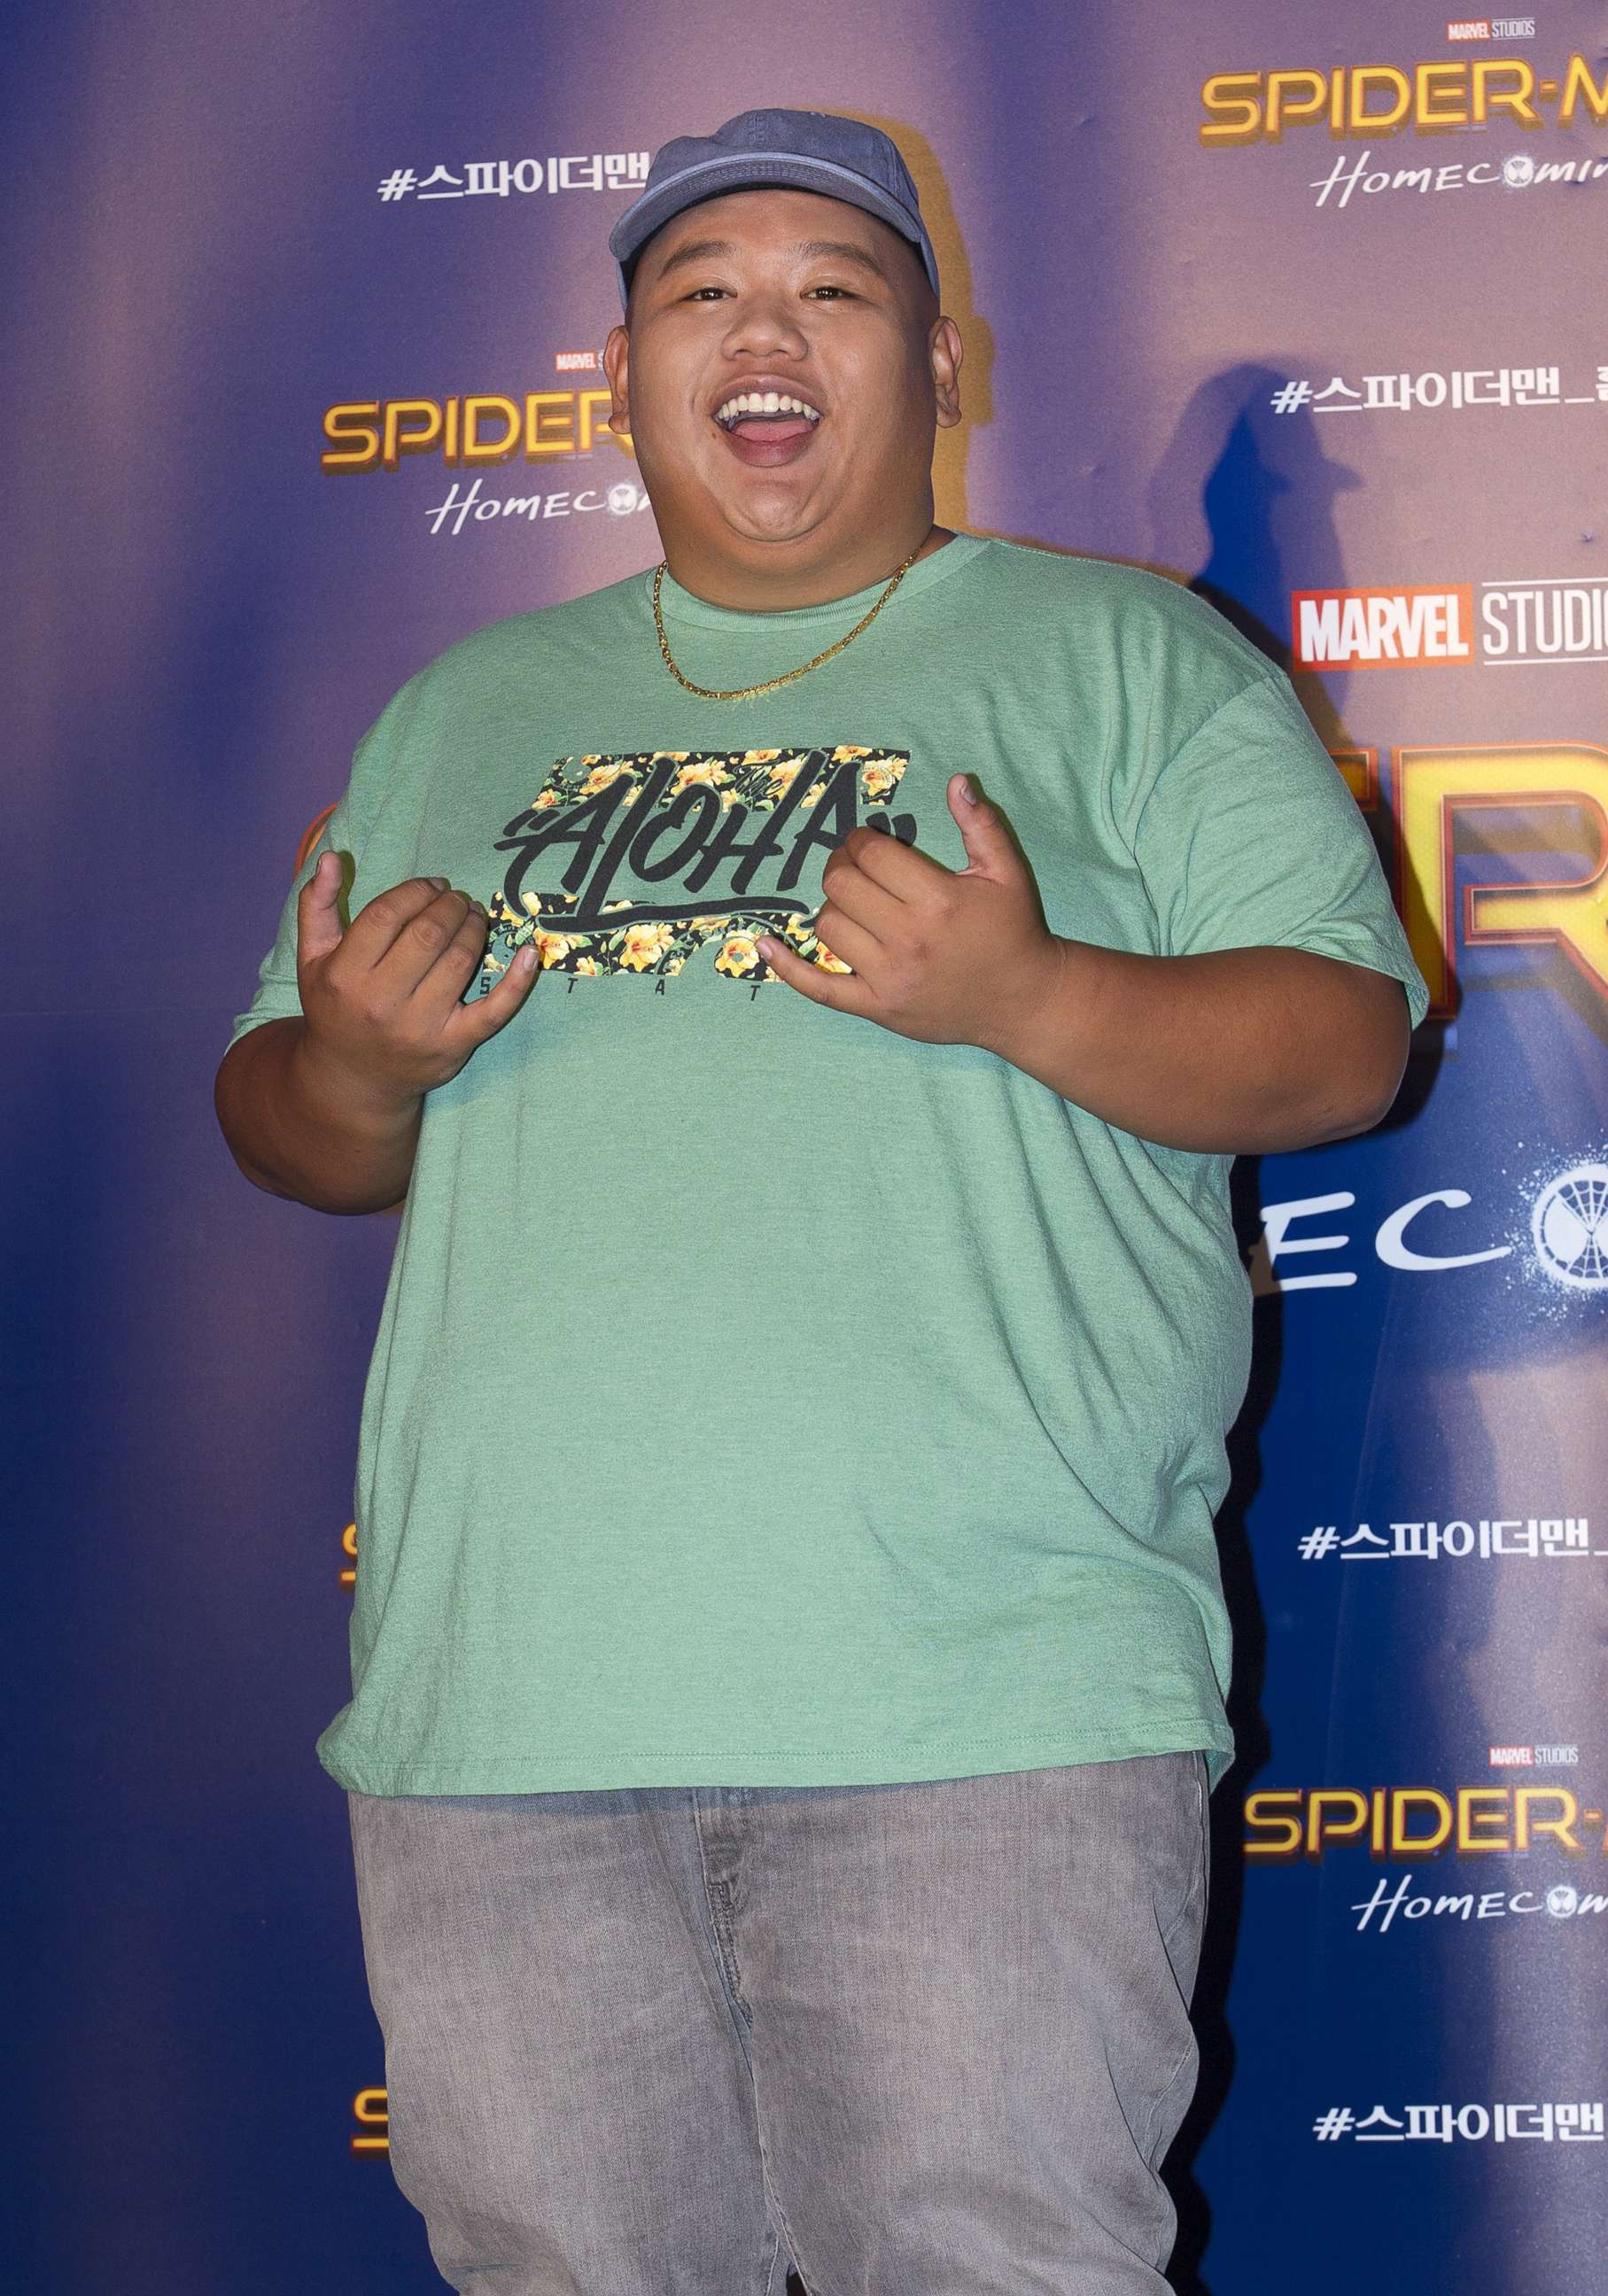 PHOTO: Jacob Batalon attends a press conference to promote new movie "Spider-Man : Homecoming" at Corad Seoul Hotel in Seoul, South Korea, July 3, 2017.